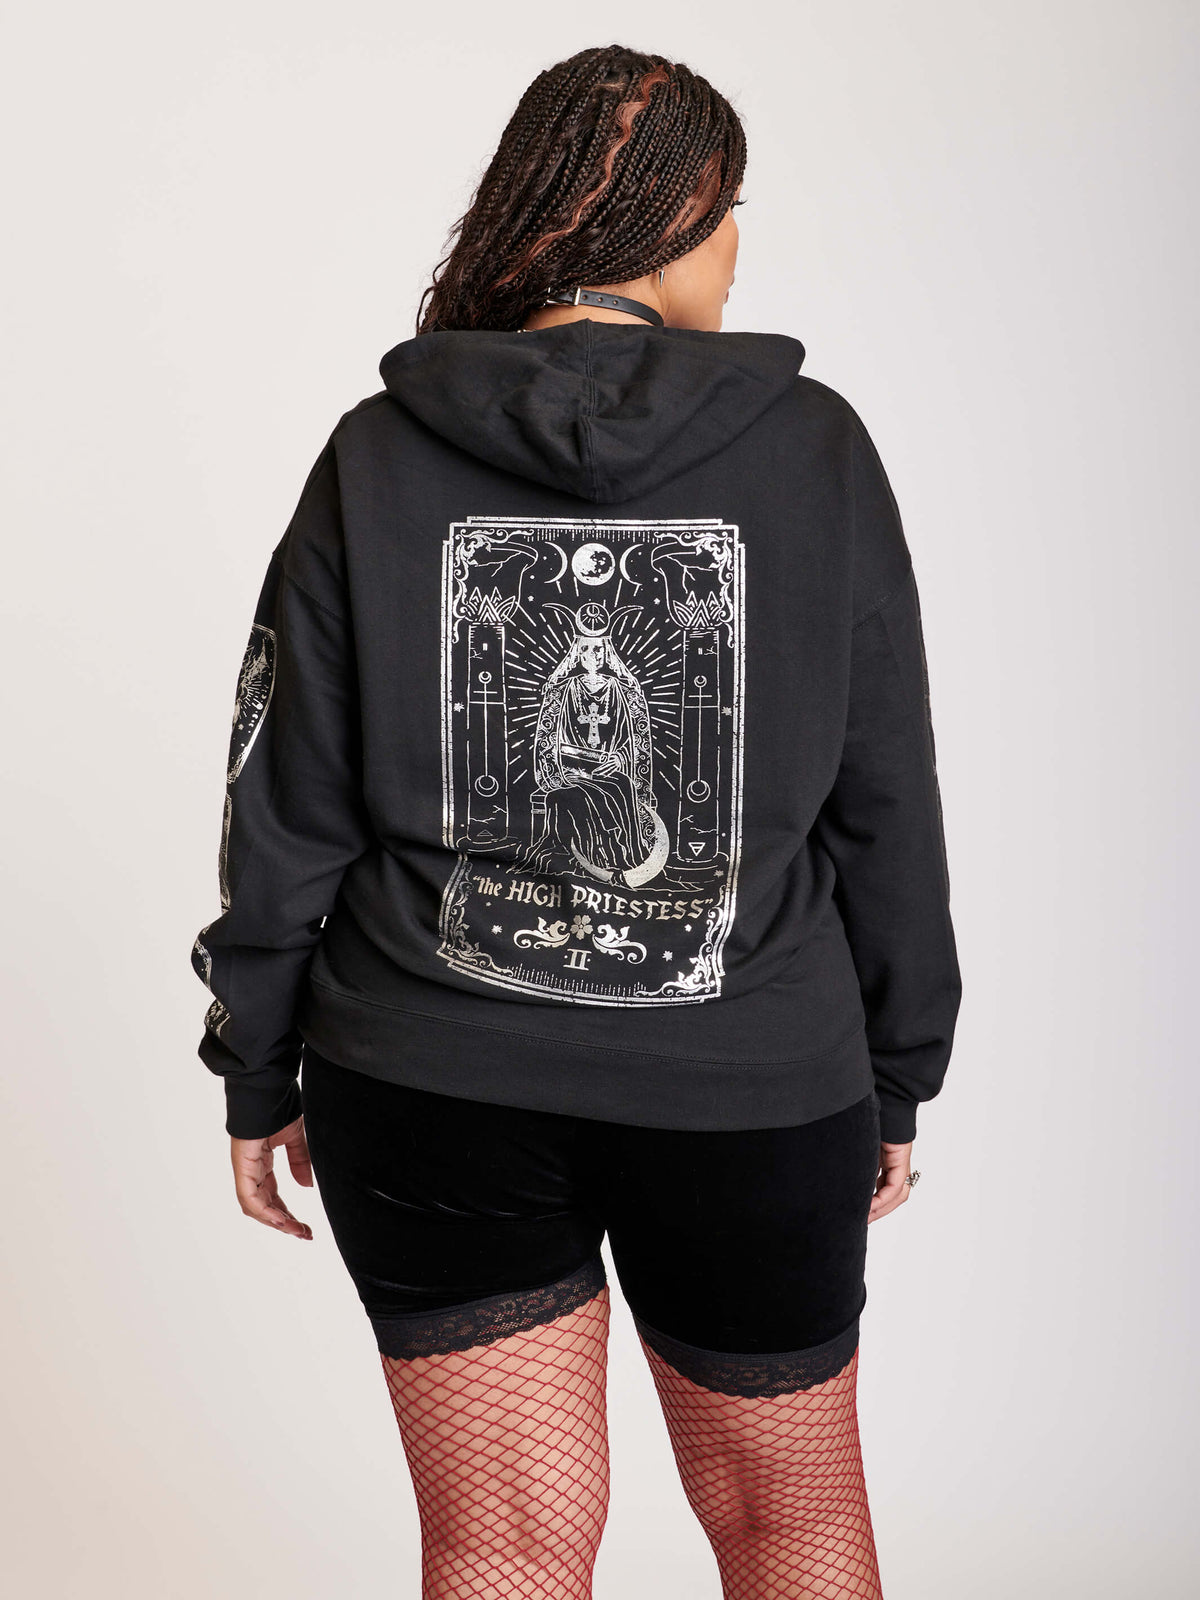 Black hoodie with silver high priestess back and arm graphics